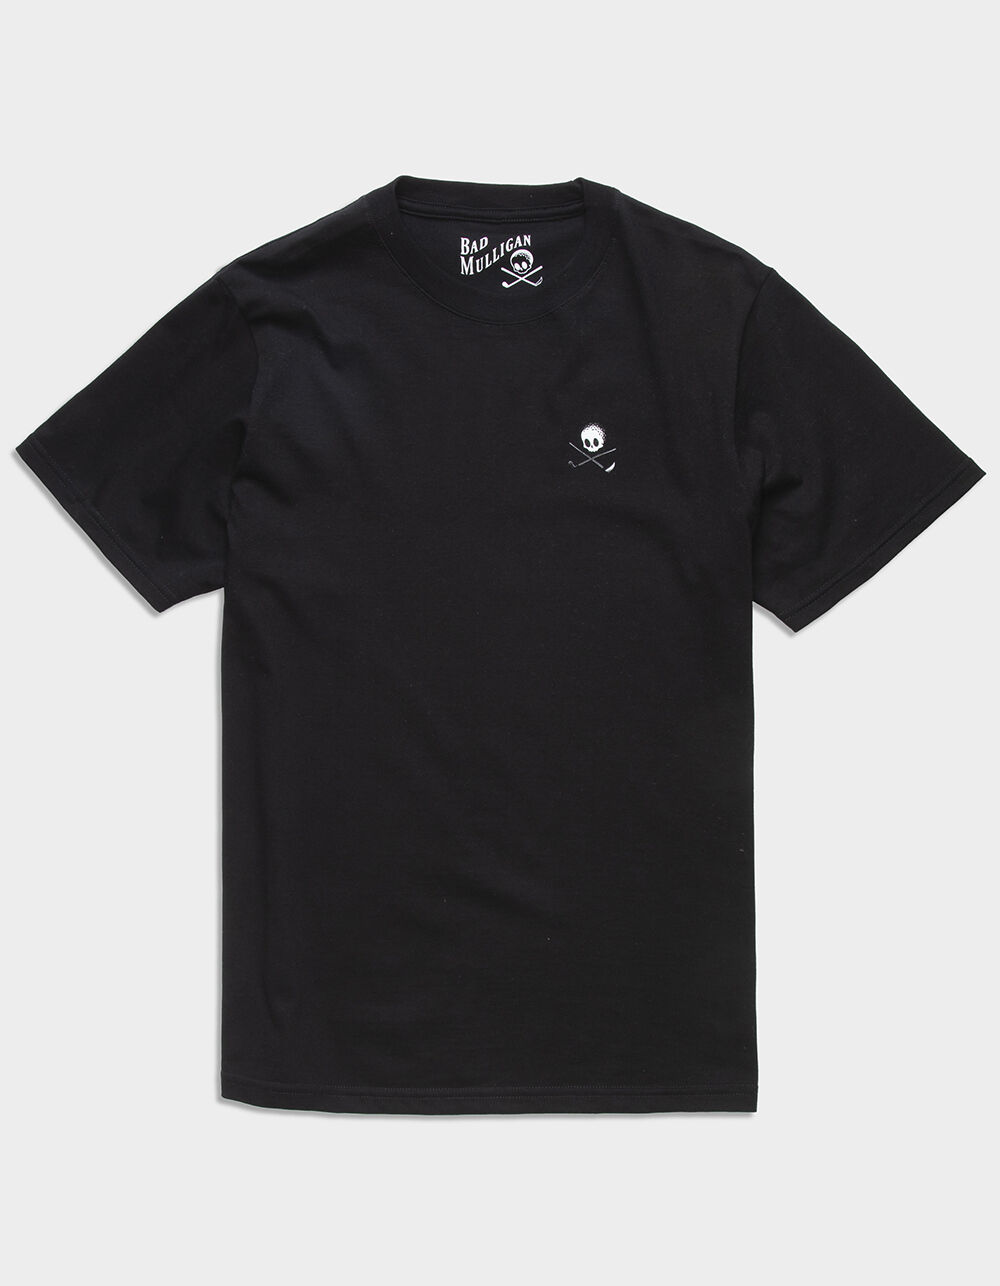 BAD MULLIGAN By The Trap Mens Tee - BLACK | Tillys